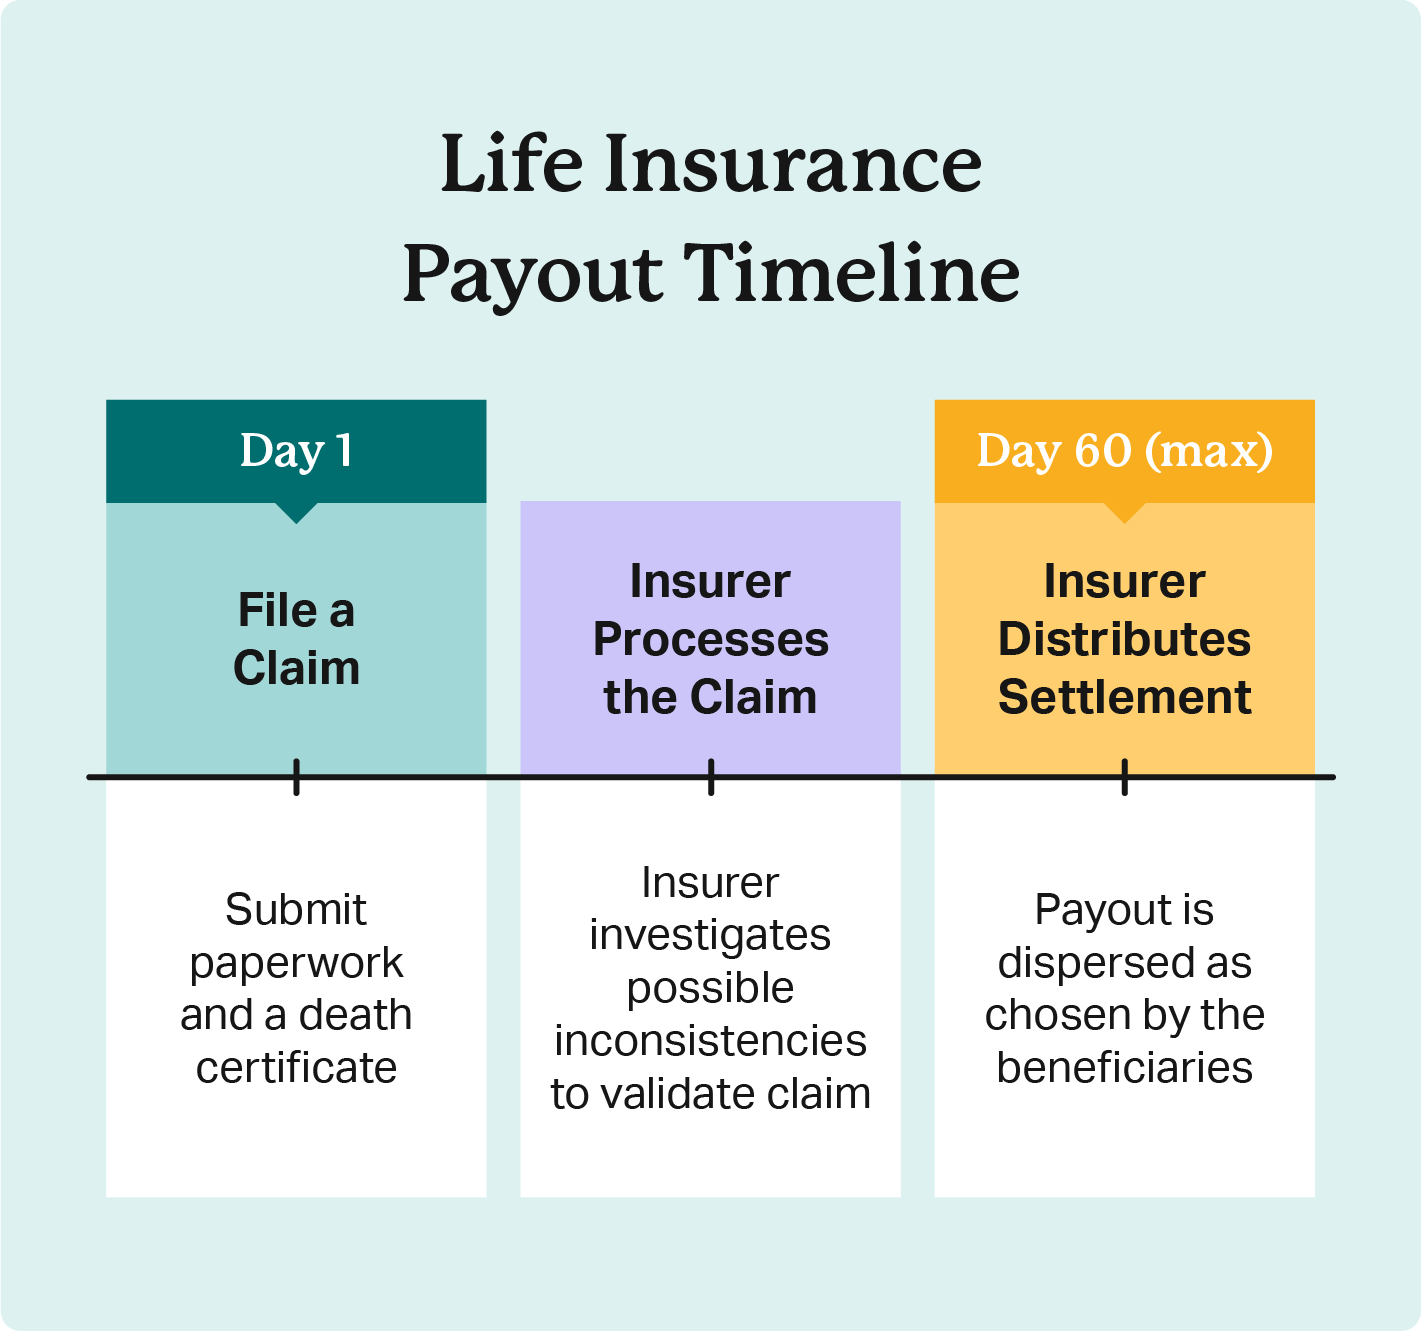 Timeline graph details payout stages from filing, to processing, and finally settlement distribution within 60 days. 